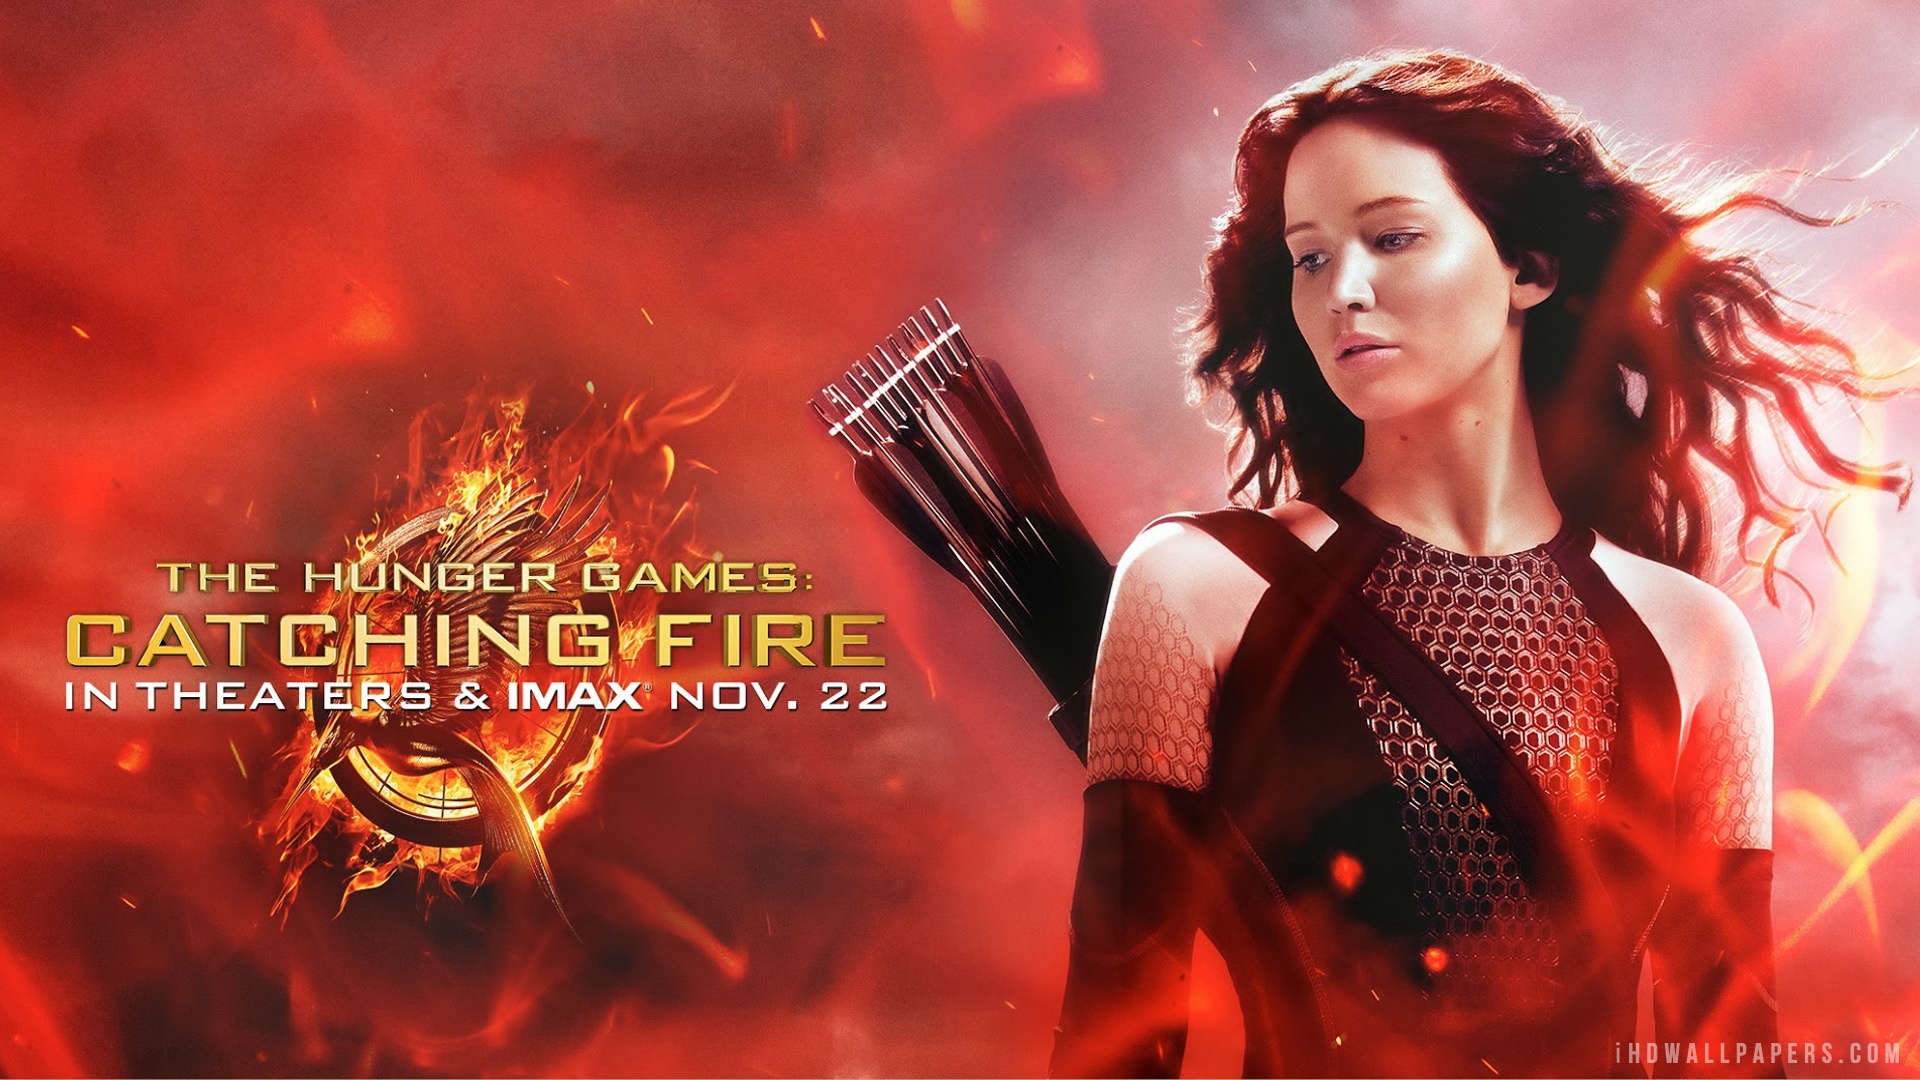 The hunger games catching fire torrent axxo seungri big bang documentary torrent